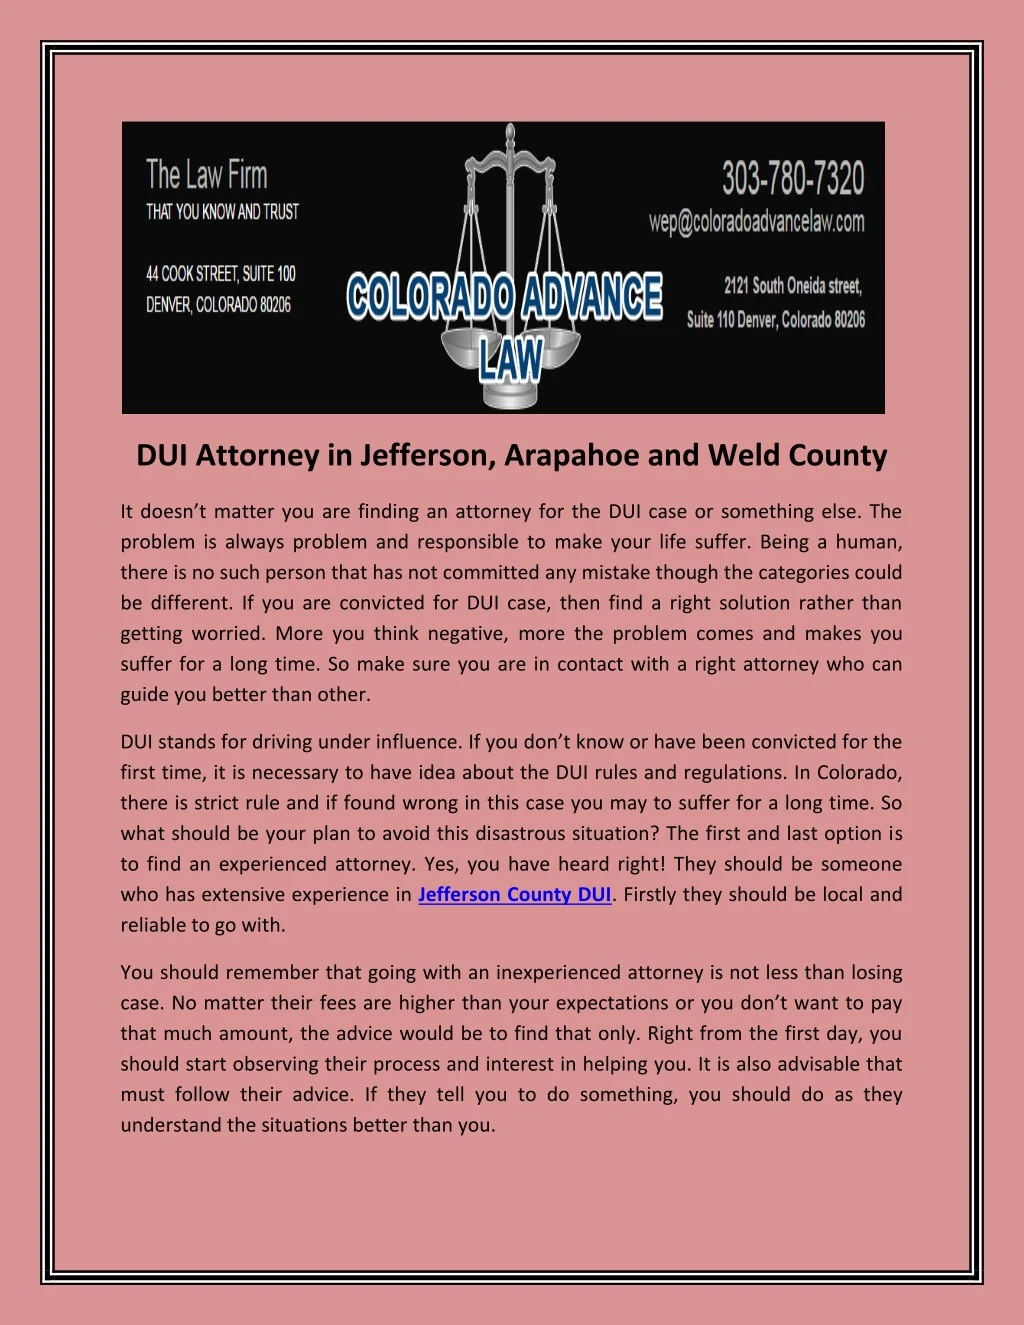 dui attorney in jefferson arapahoe and weld county